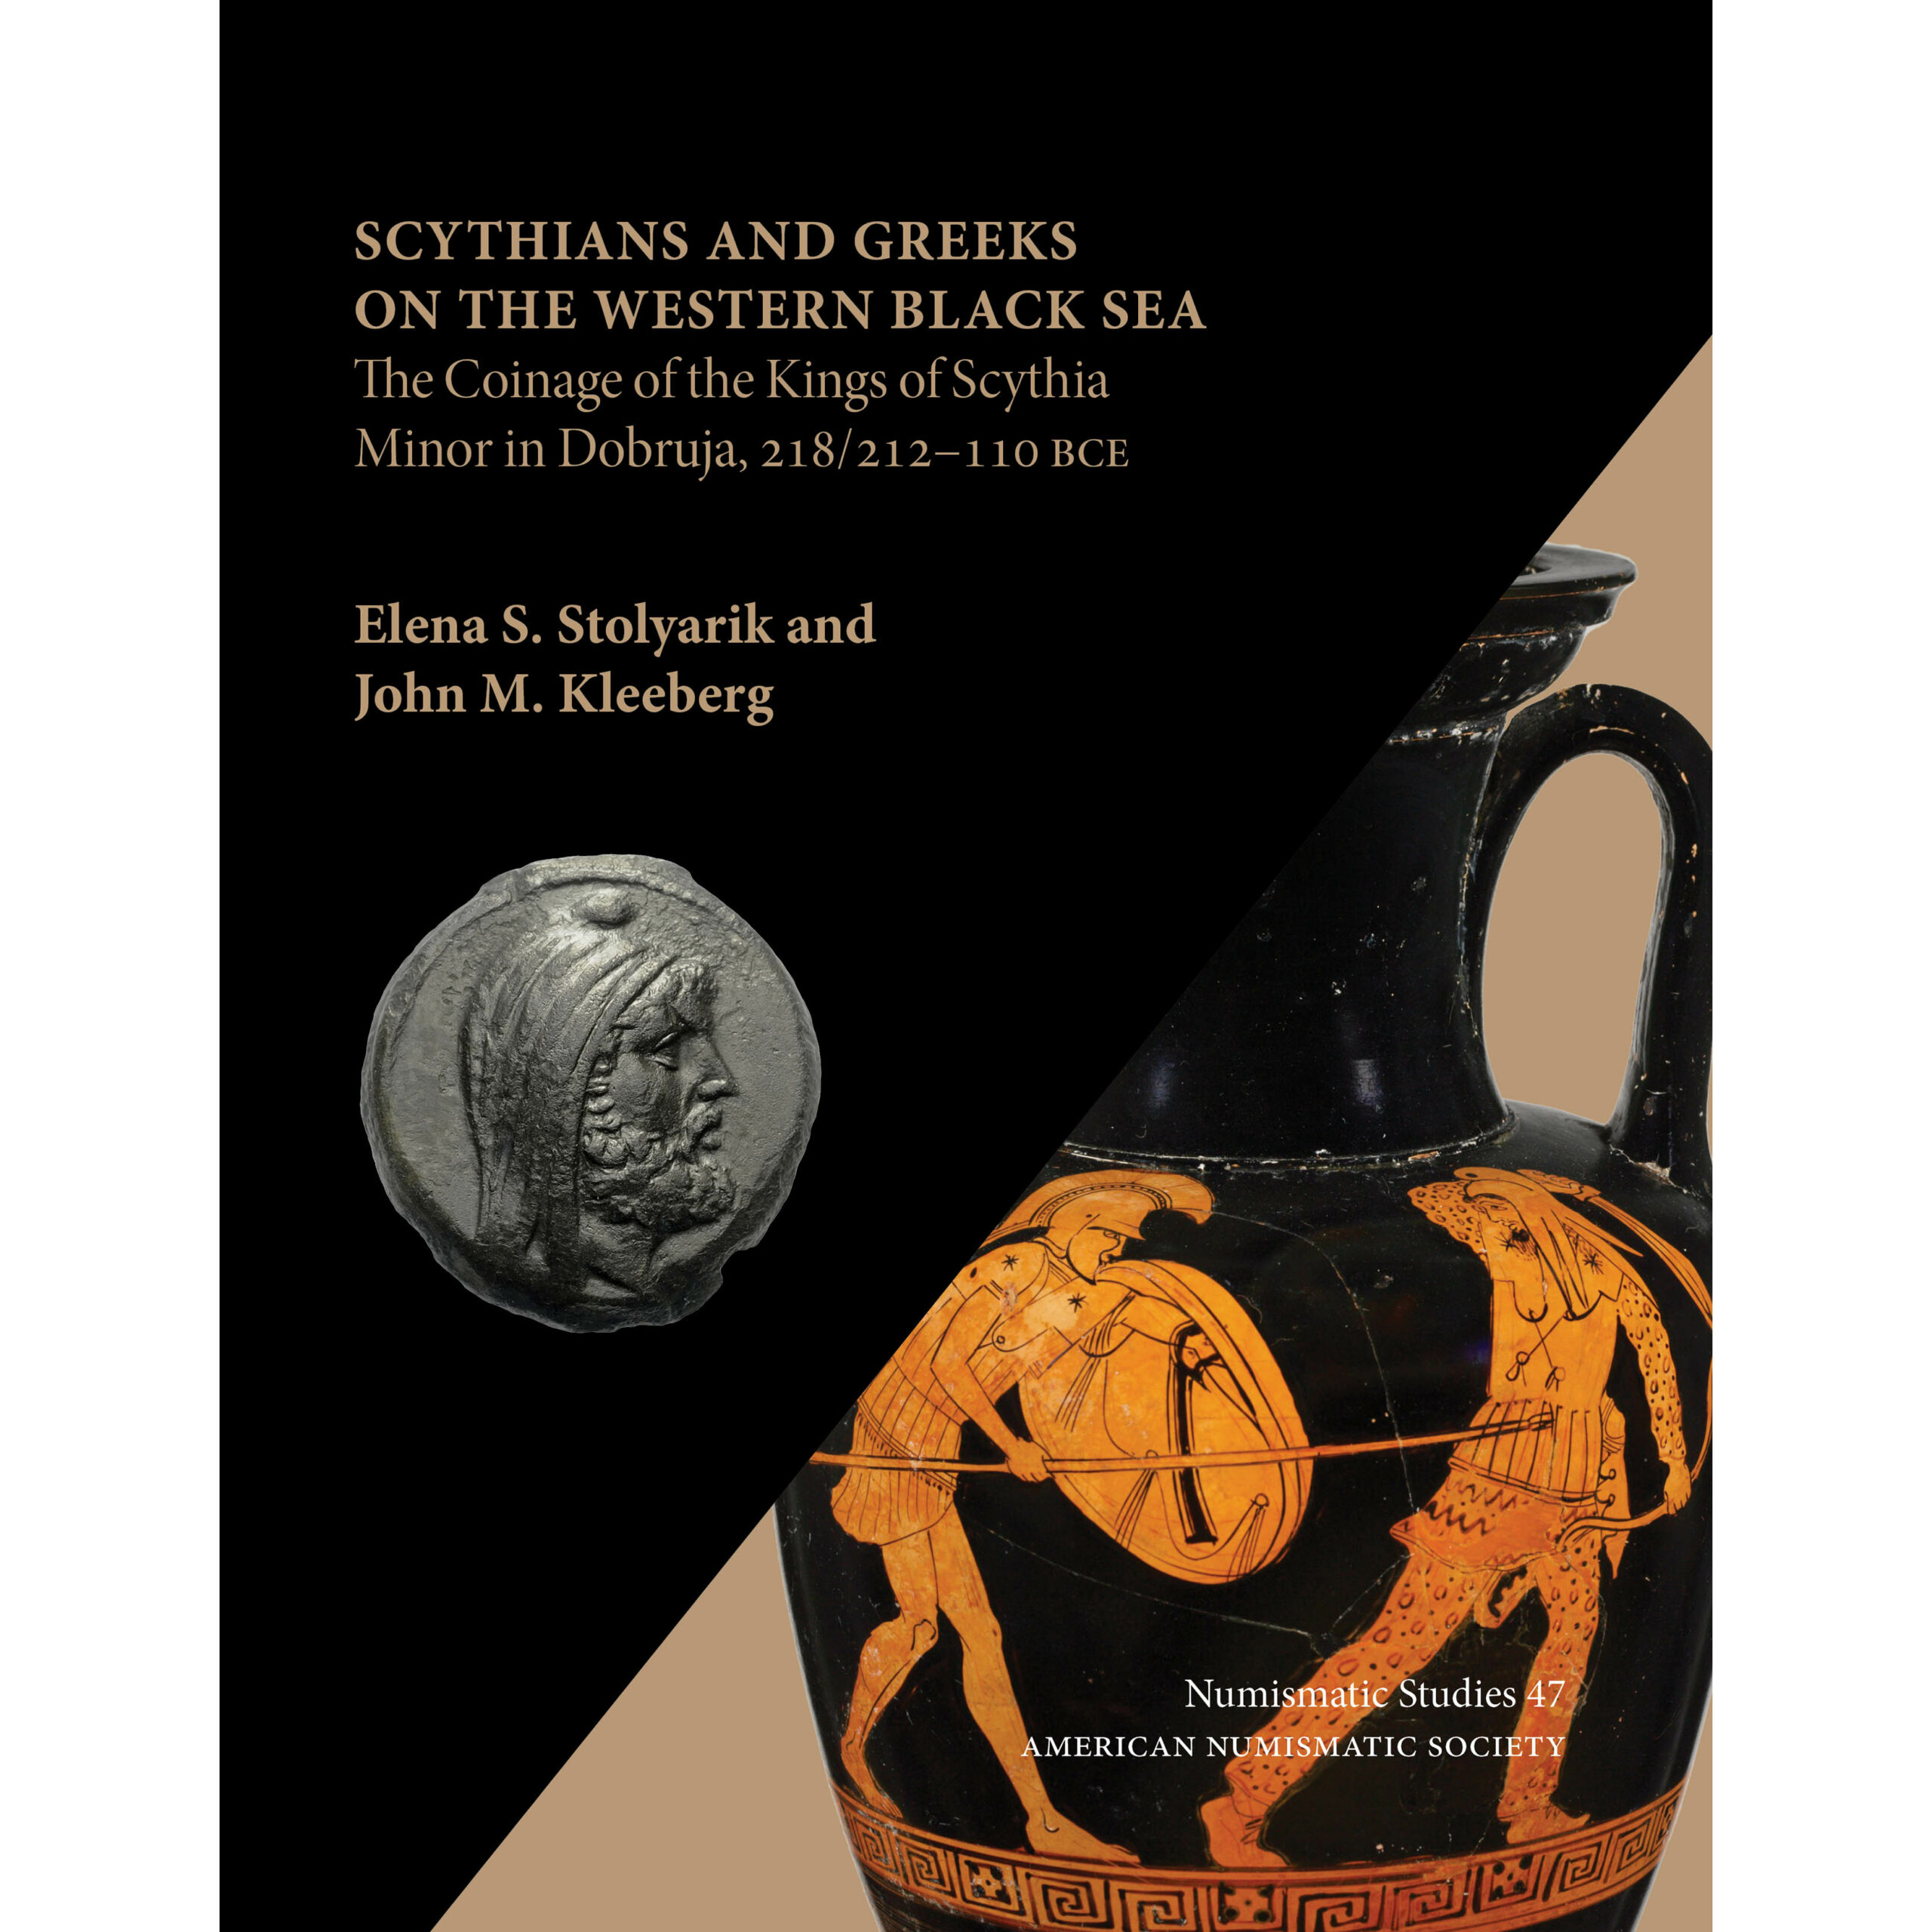 New Book: Scythians and Greeks on the Western Black Sea